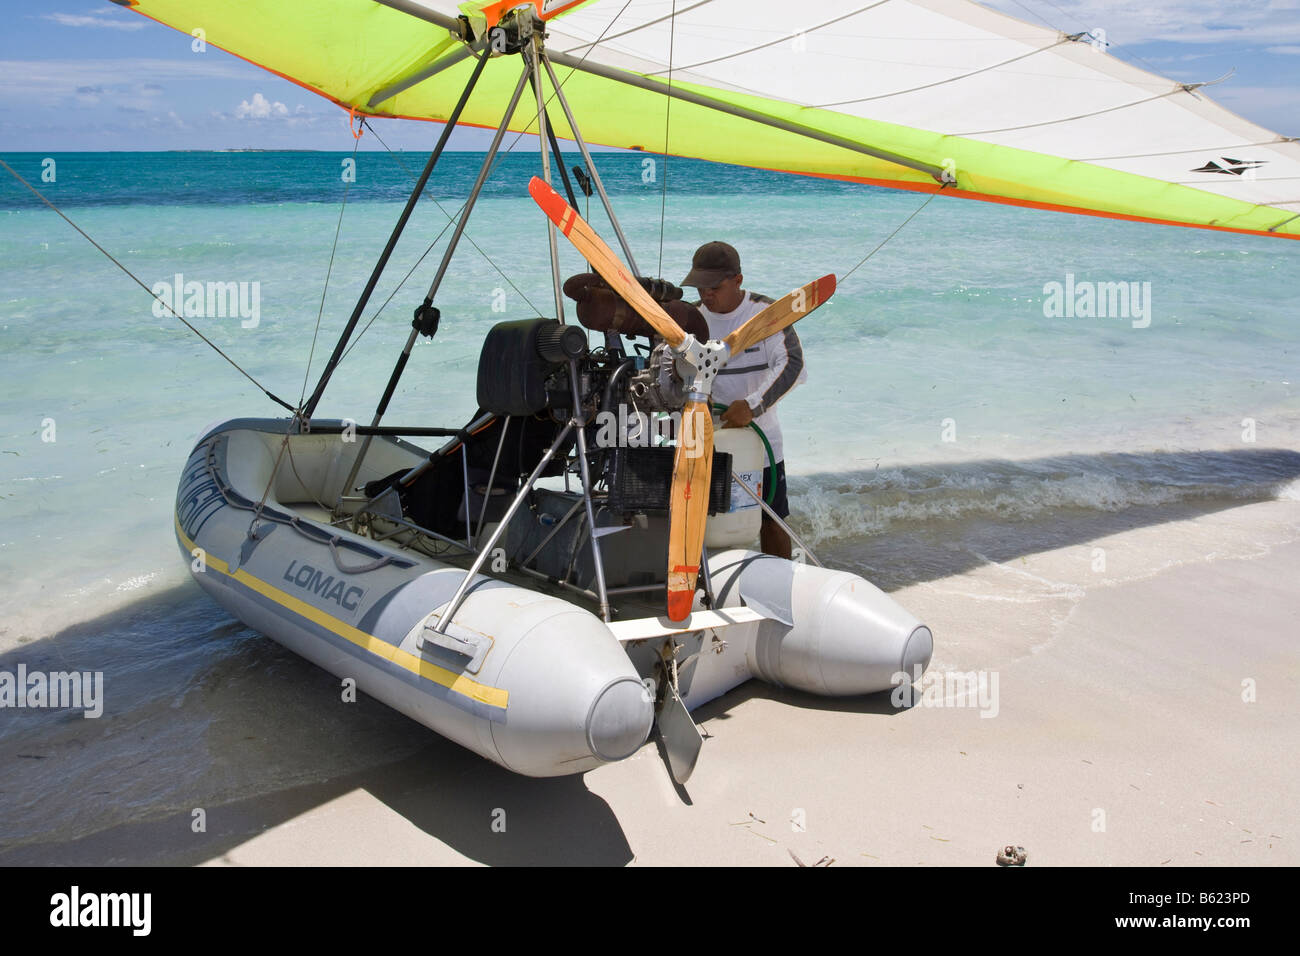 Motorised hang glider being refueled, UL-Trike, Ultra Light airplane with a life boat, Varadero, Cuba, Caribbean, Central Ameri Stock Photo